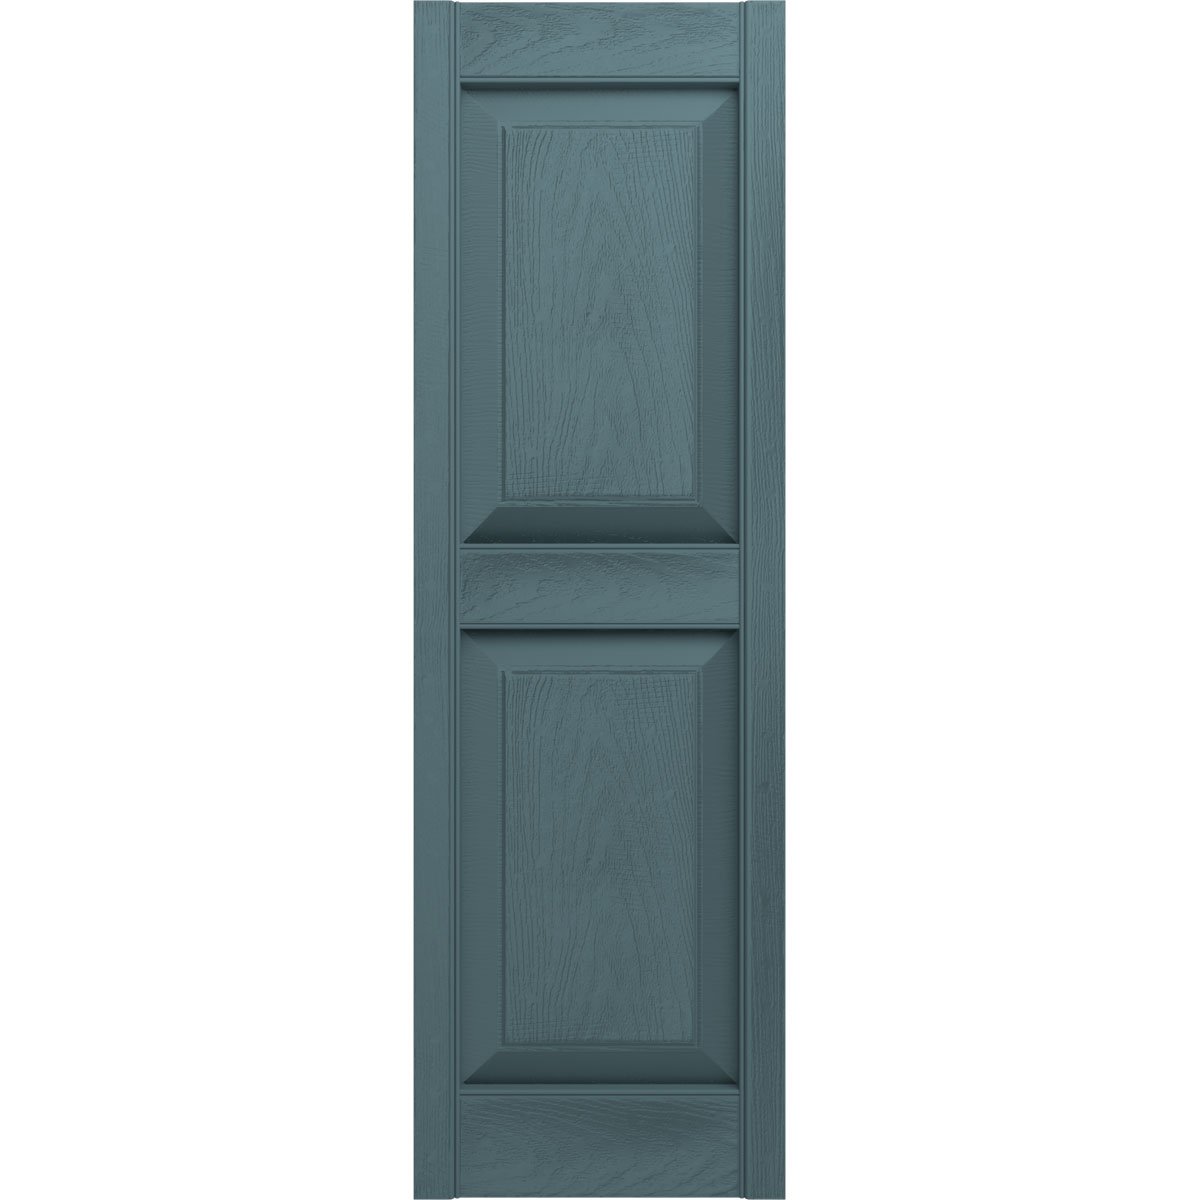 Mid America 00021447004 Standard Size Williamsburg Double Panel Shutter Per Pair Wedgewood Blue 14 3/4W x 47H